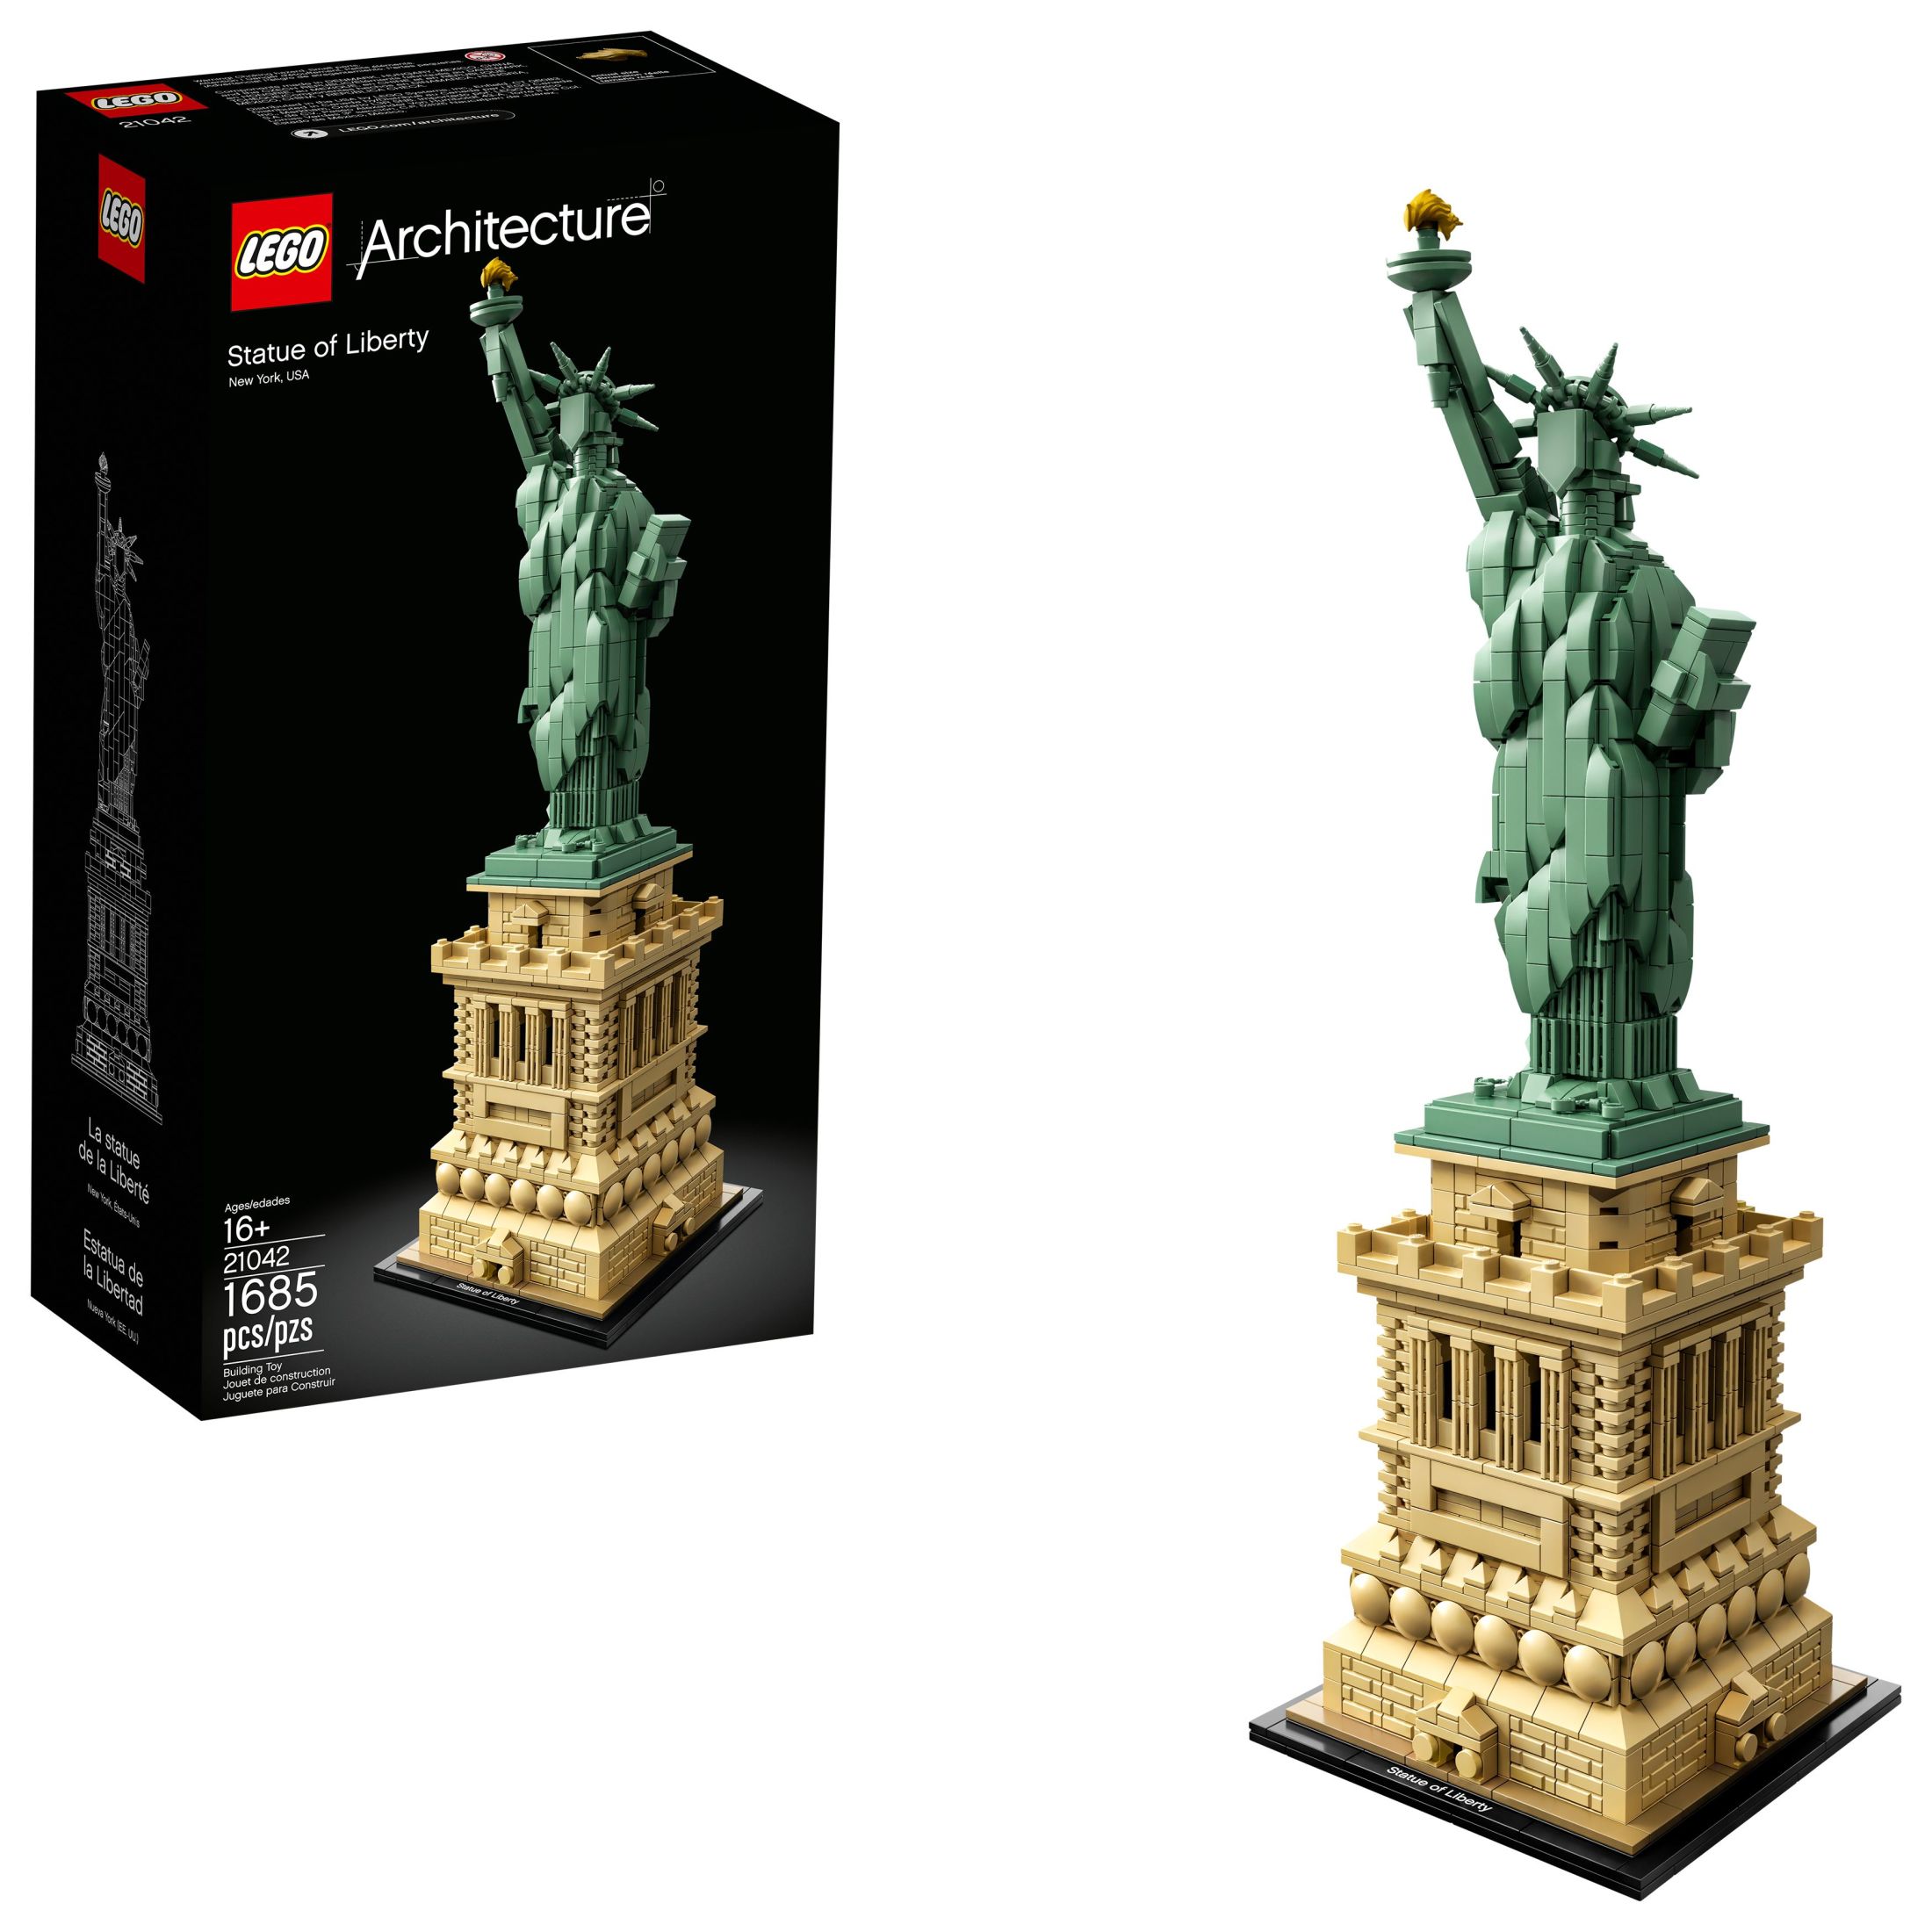 LEGO Architecture Statue of Liberty 21042 Model Building Set - Collectible New York City Souvenir, Creative Home Décor or Office Centerpiece, Great Gift Idea for Adults and Teens - image 1 of 7